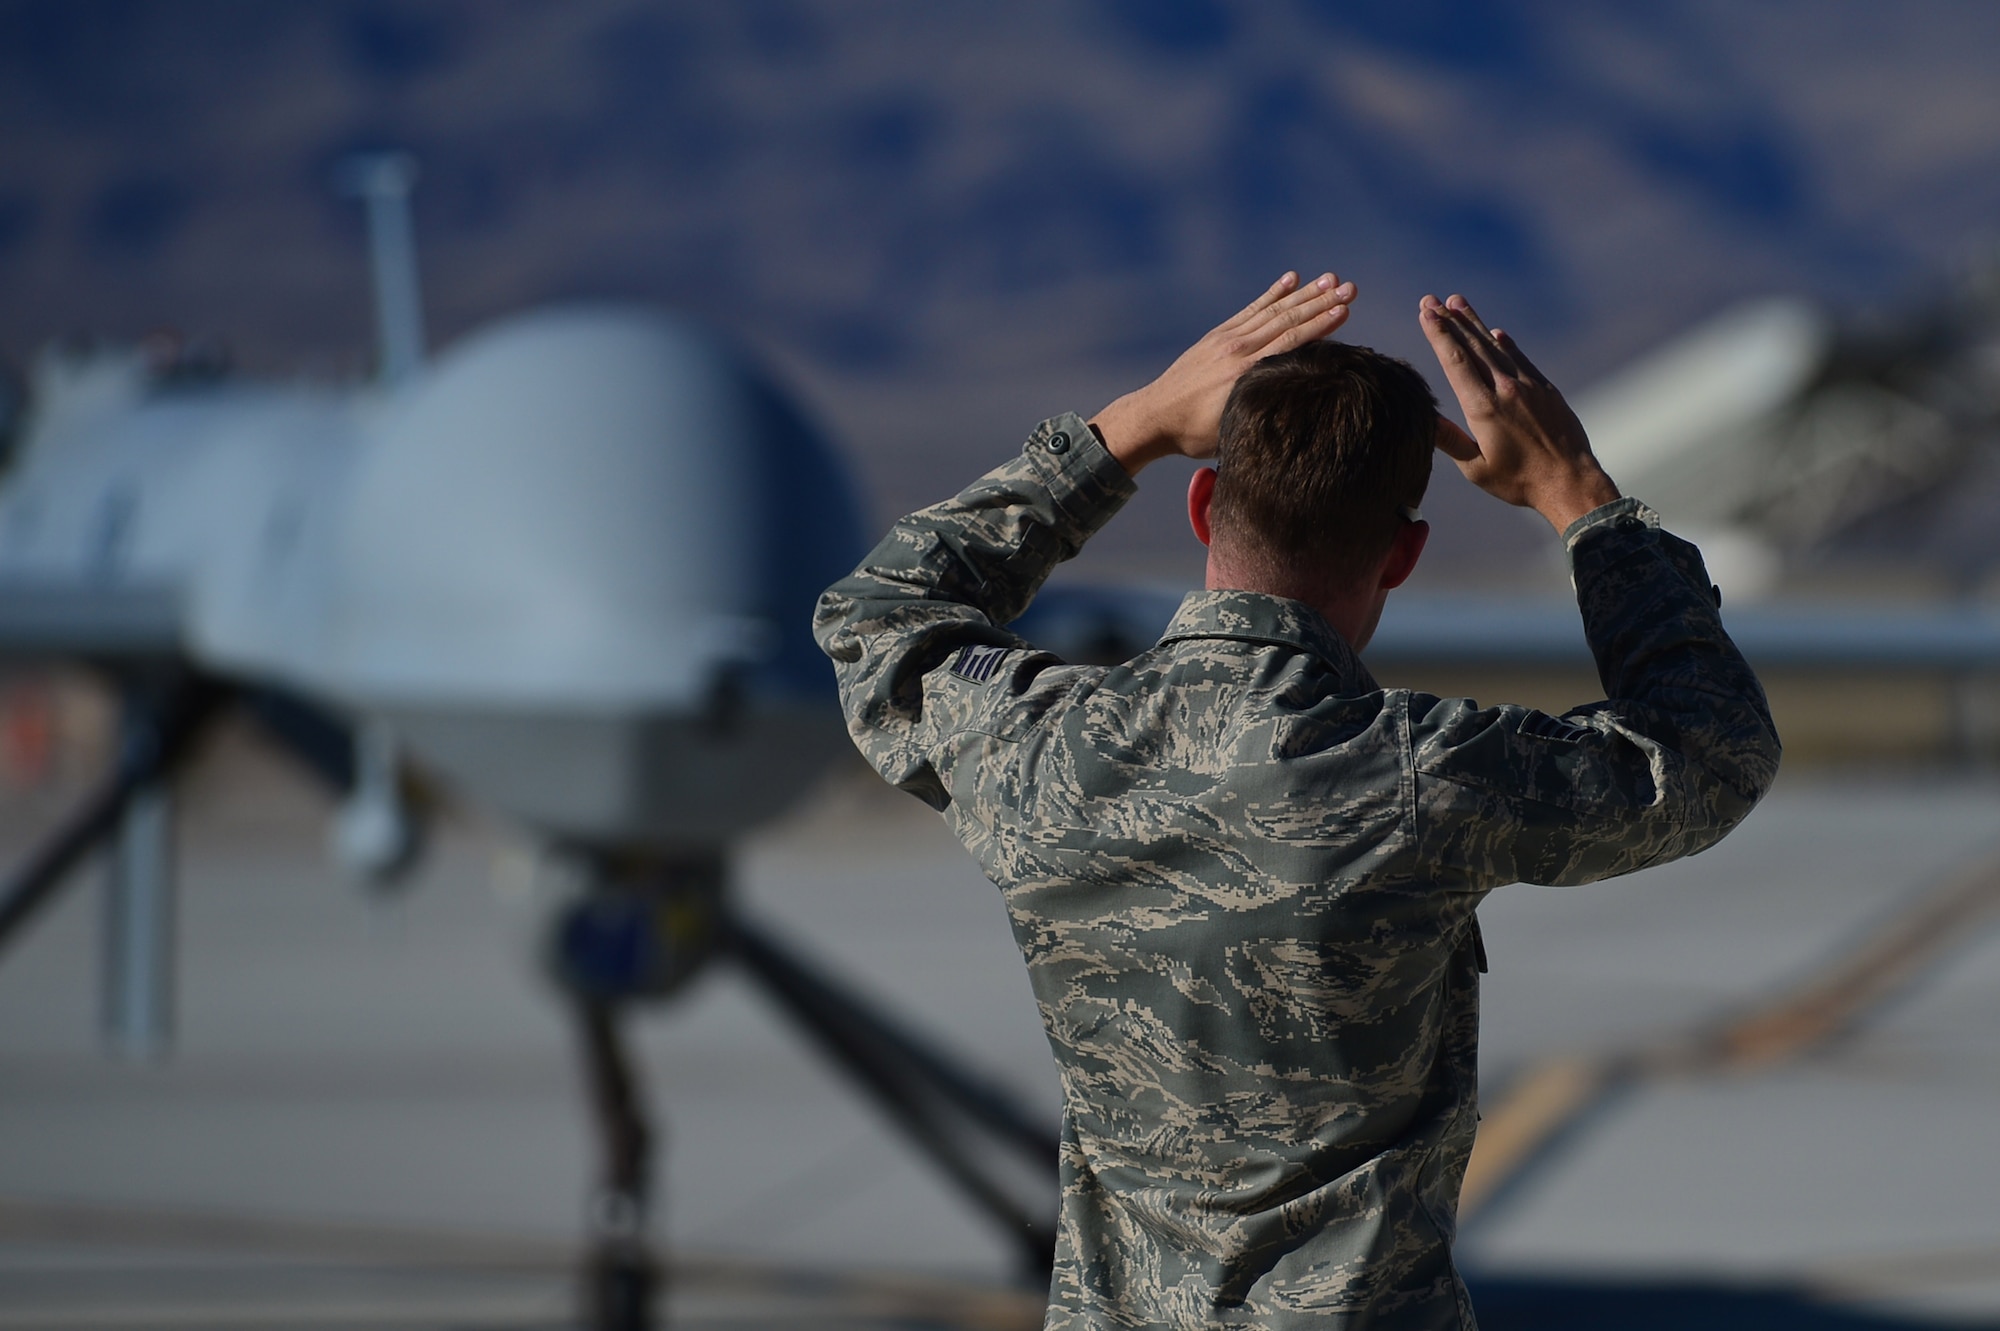 A crew chief from the 432nd Aircraft Maintenance Squadron taxis in an MQ-1 Predator remotely piloted aircraft during a post-flight inspection Nov. 1, 2013. Predators can perform the following missions and tasks: intelligence, surveillance, reconnaissance, close air support, combat search and rescue, precision strike, buddy-lase, convoy/raid overwatch, route clearance, target development, and terminal air guidance. The USAF’s MQ-9 Reaper and MQ-1 Predator fleet surpassed 2 million cumulative flight hours on Oct. 22, 2013.